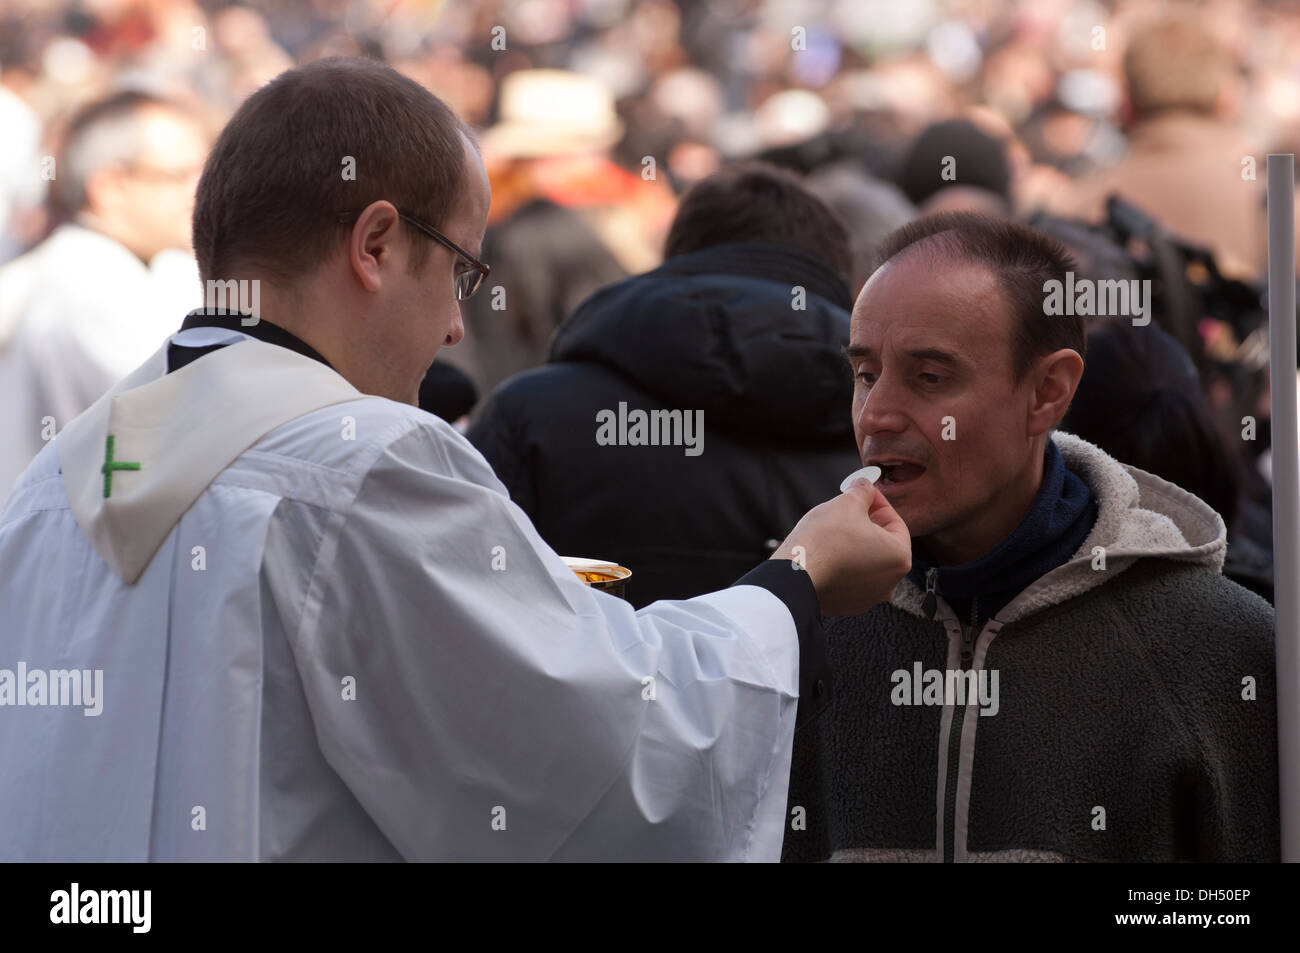 Priest give communion to faithful Stock Photo